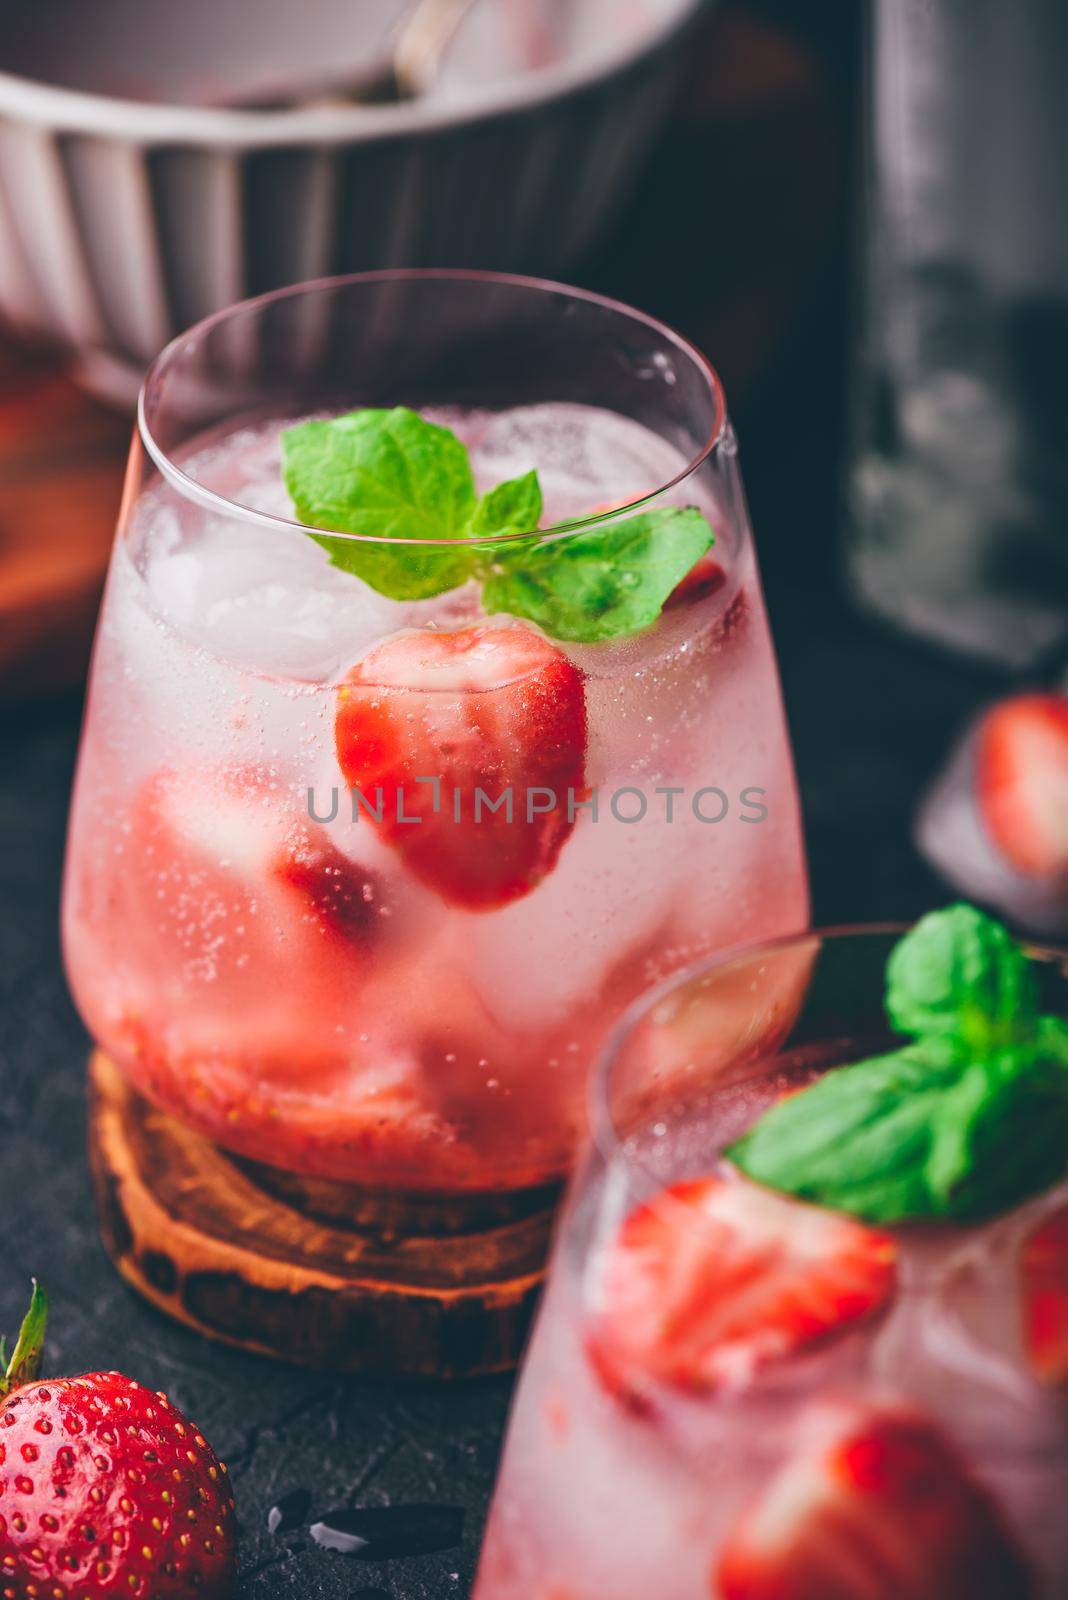 Cocktails with strawberry, gin and tonic by Seva_blsv